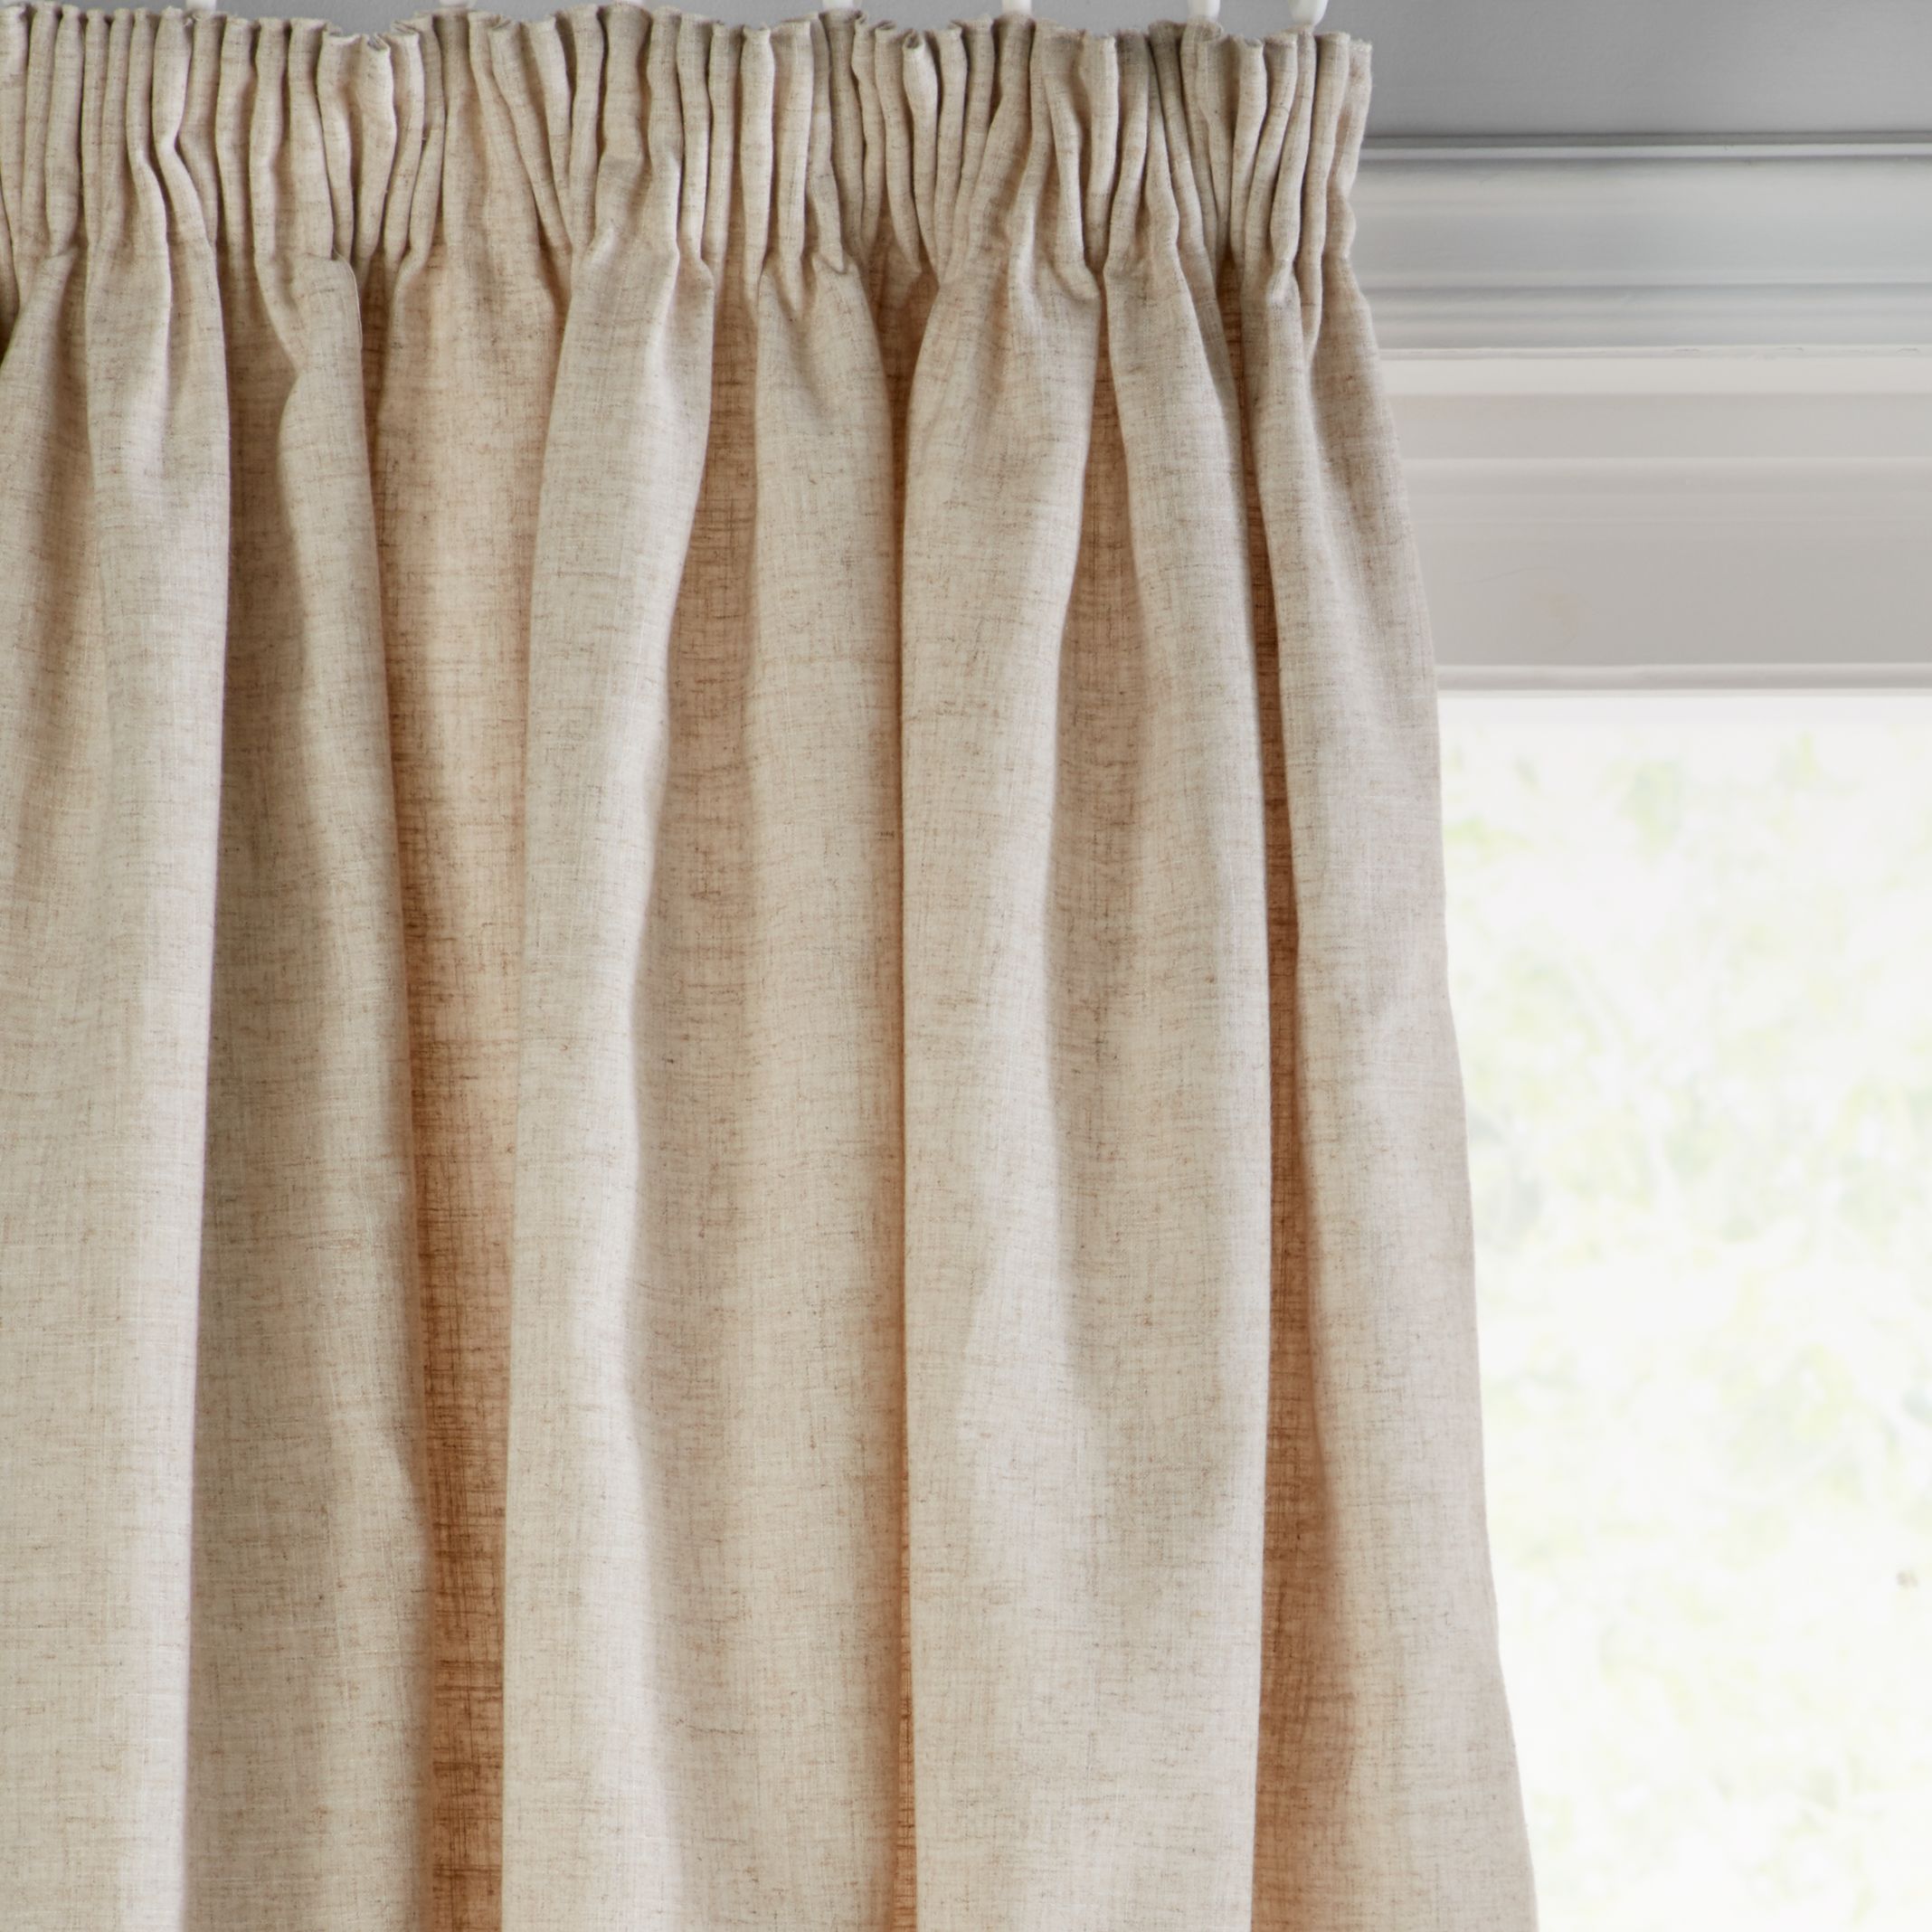 John Lewis & Partners Leckford Border Pair Lined Pencil Pleat Curtains